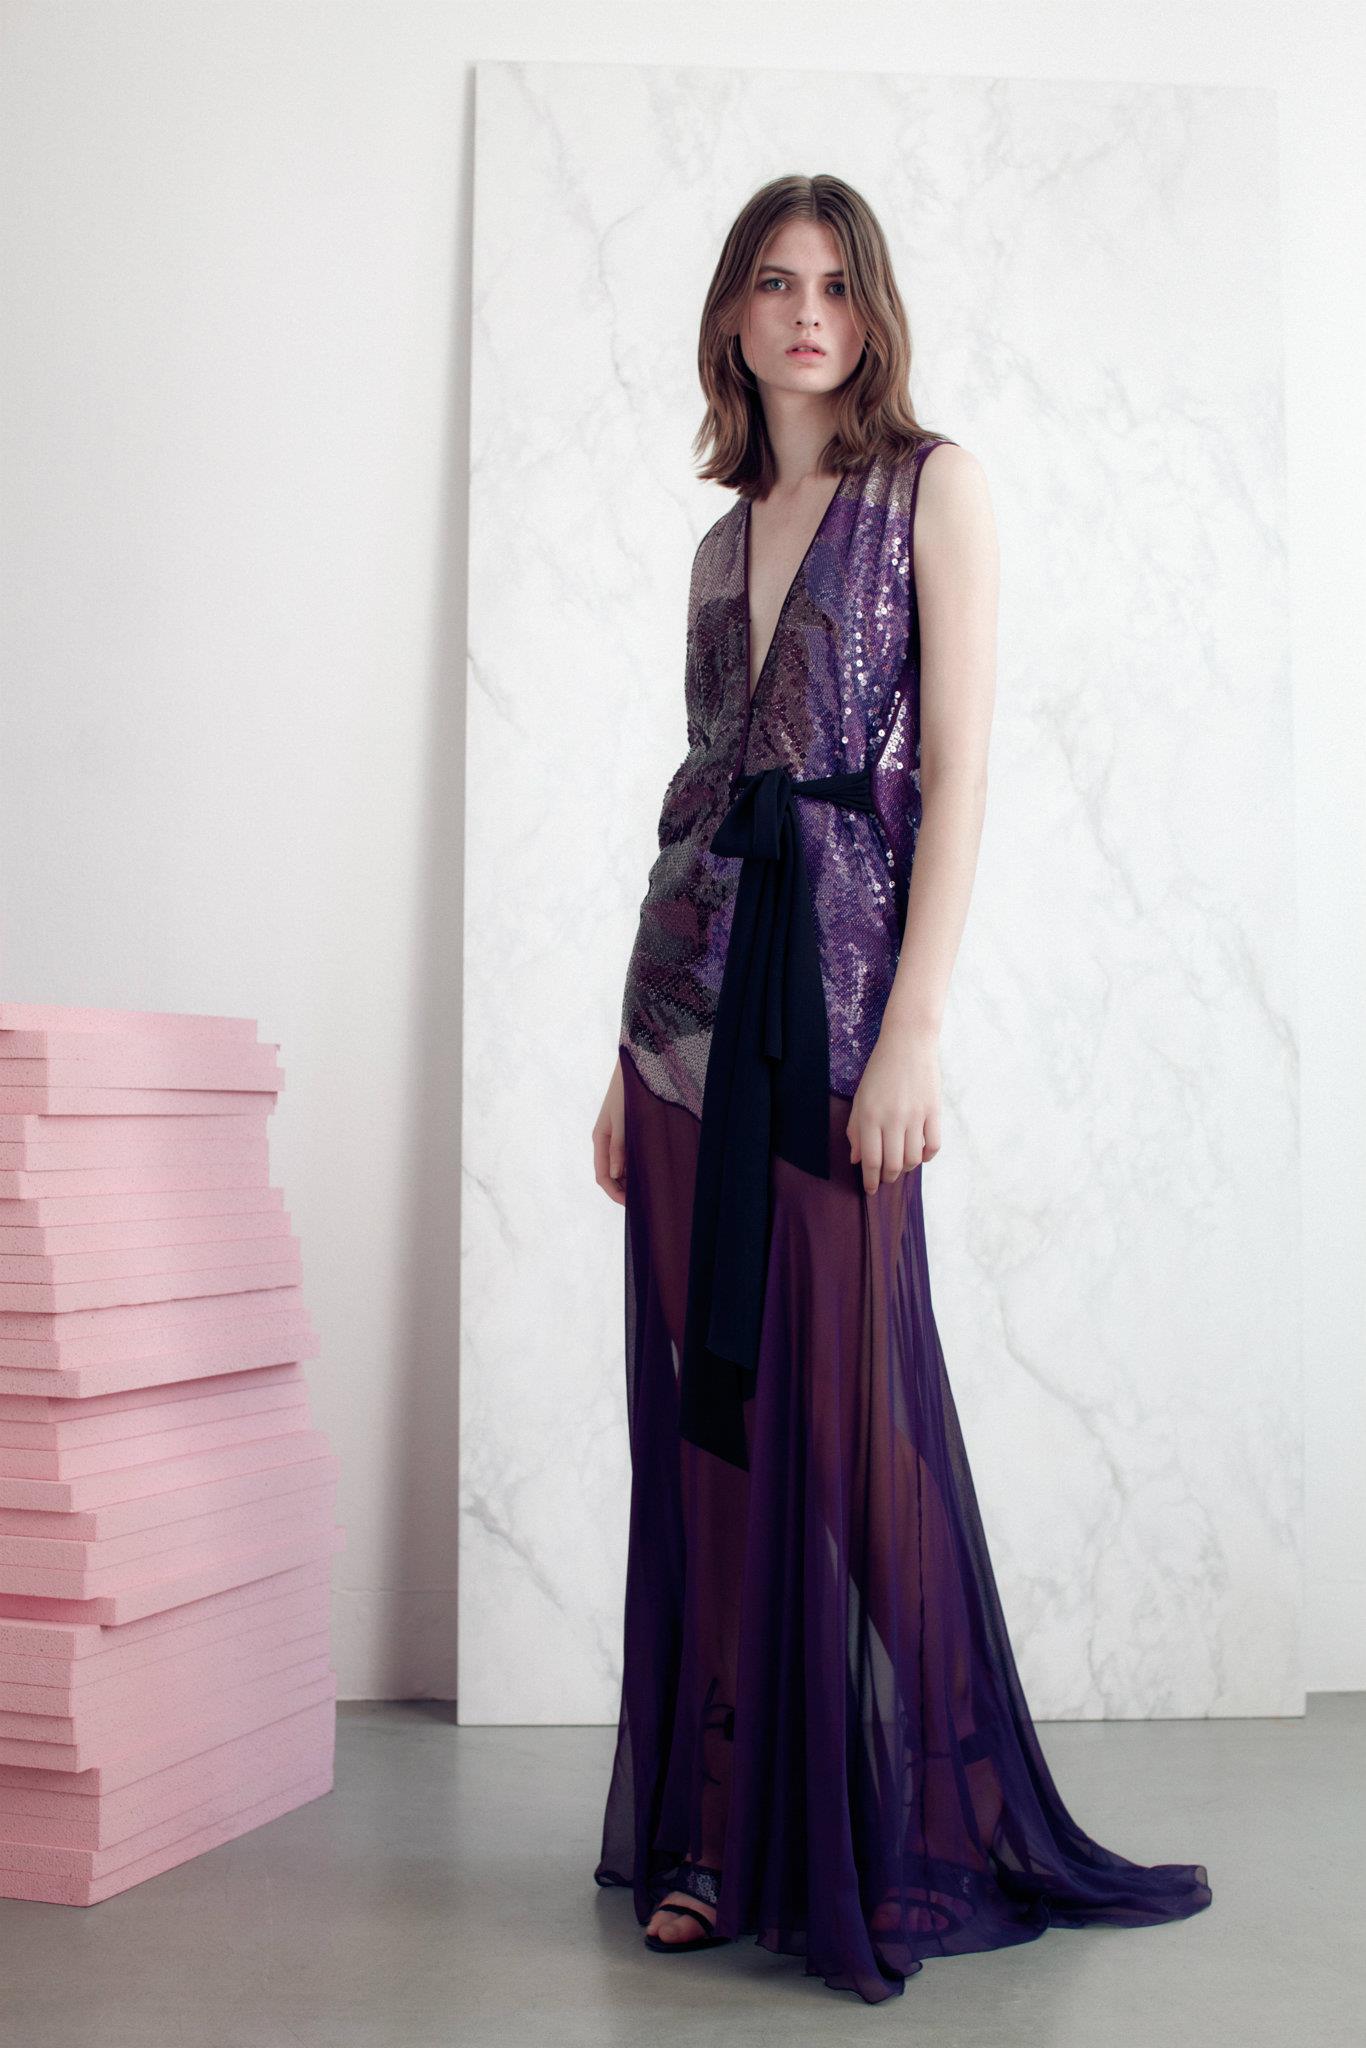 Vionnet Spring 2013 Collection 24